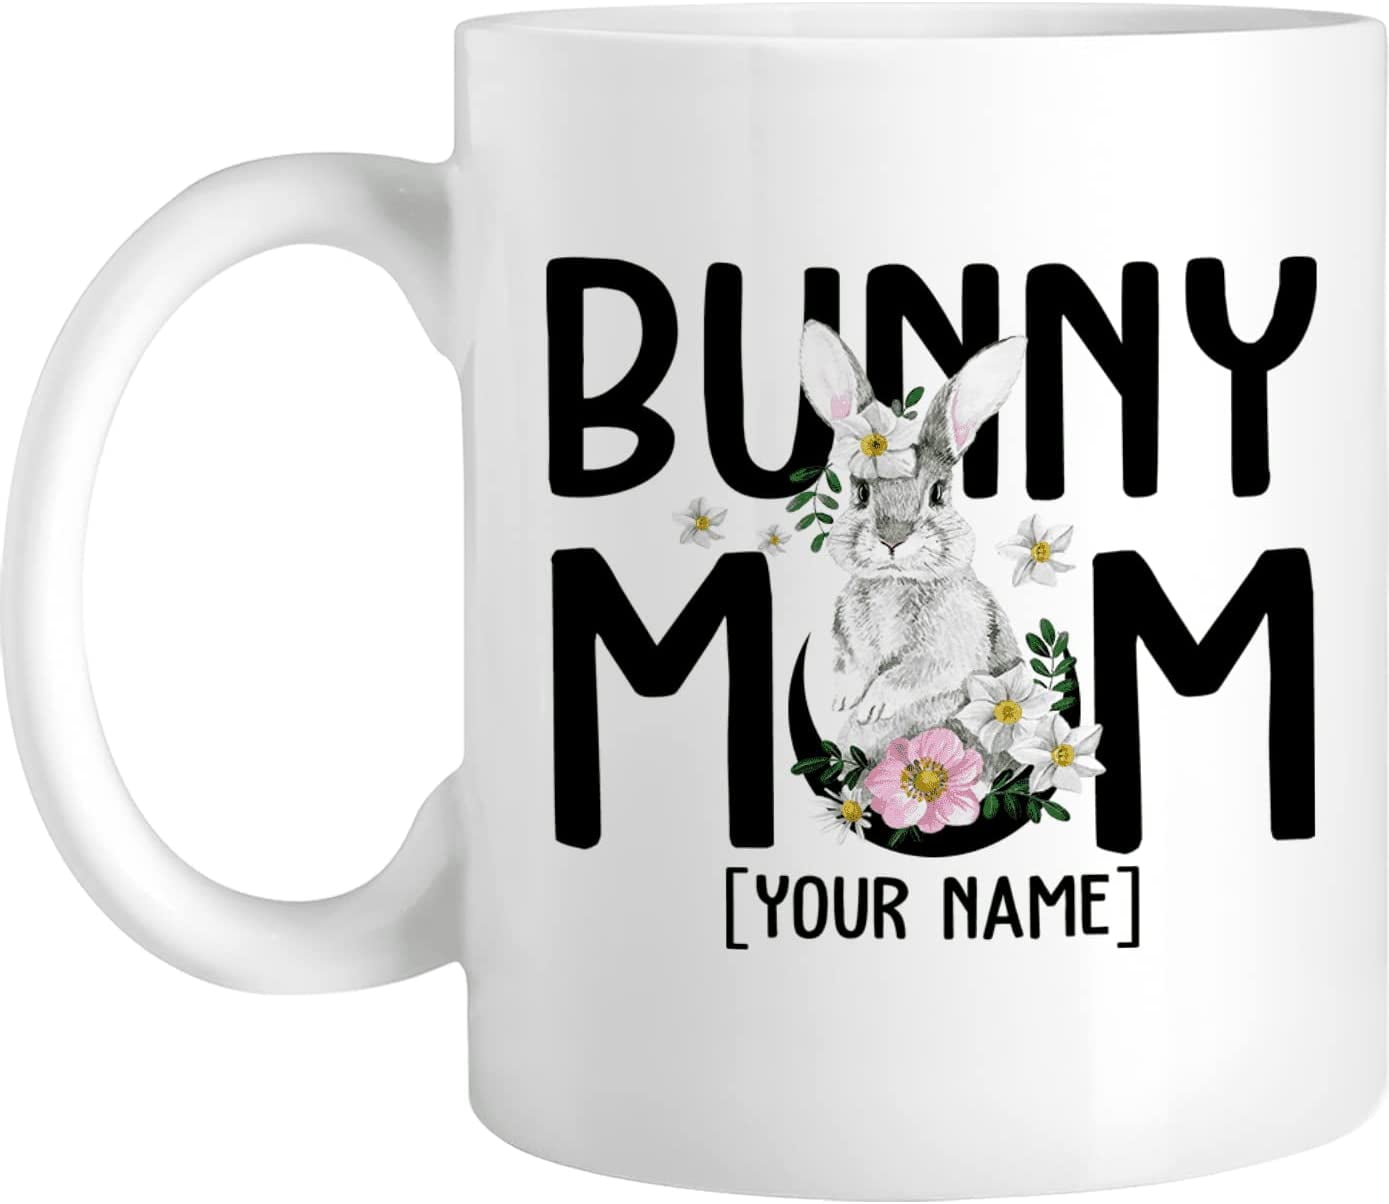 Personalized Hot Cold Coffee Mug, Classy Llama Mom Mug, Customized Novelty  Cup, Name Custom Ceramic Mugs For Travel Home Office Decor, Gift For Women  Mom, Birthday Christmas Mother Day 